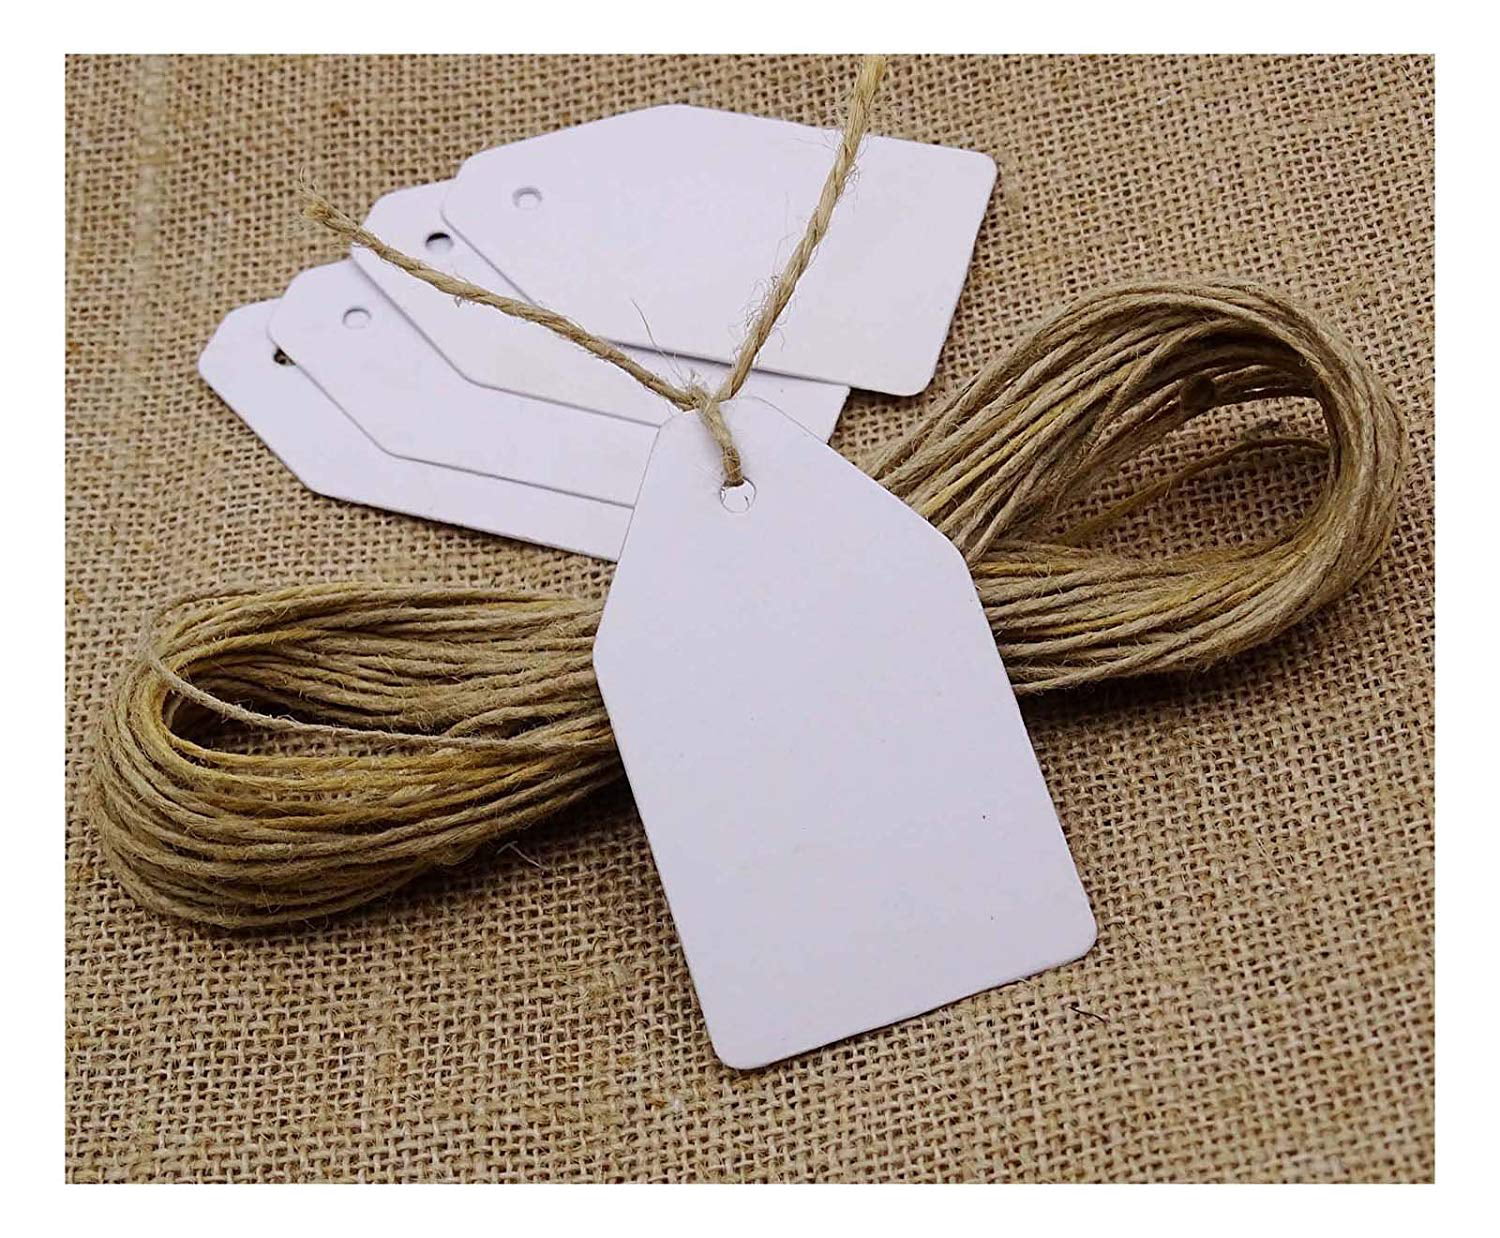 Details about   100pcs Jewelry Tags with String Writable Blank Paper Display Hanging Labels 